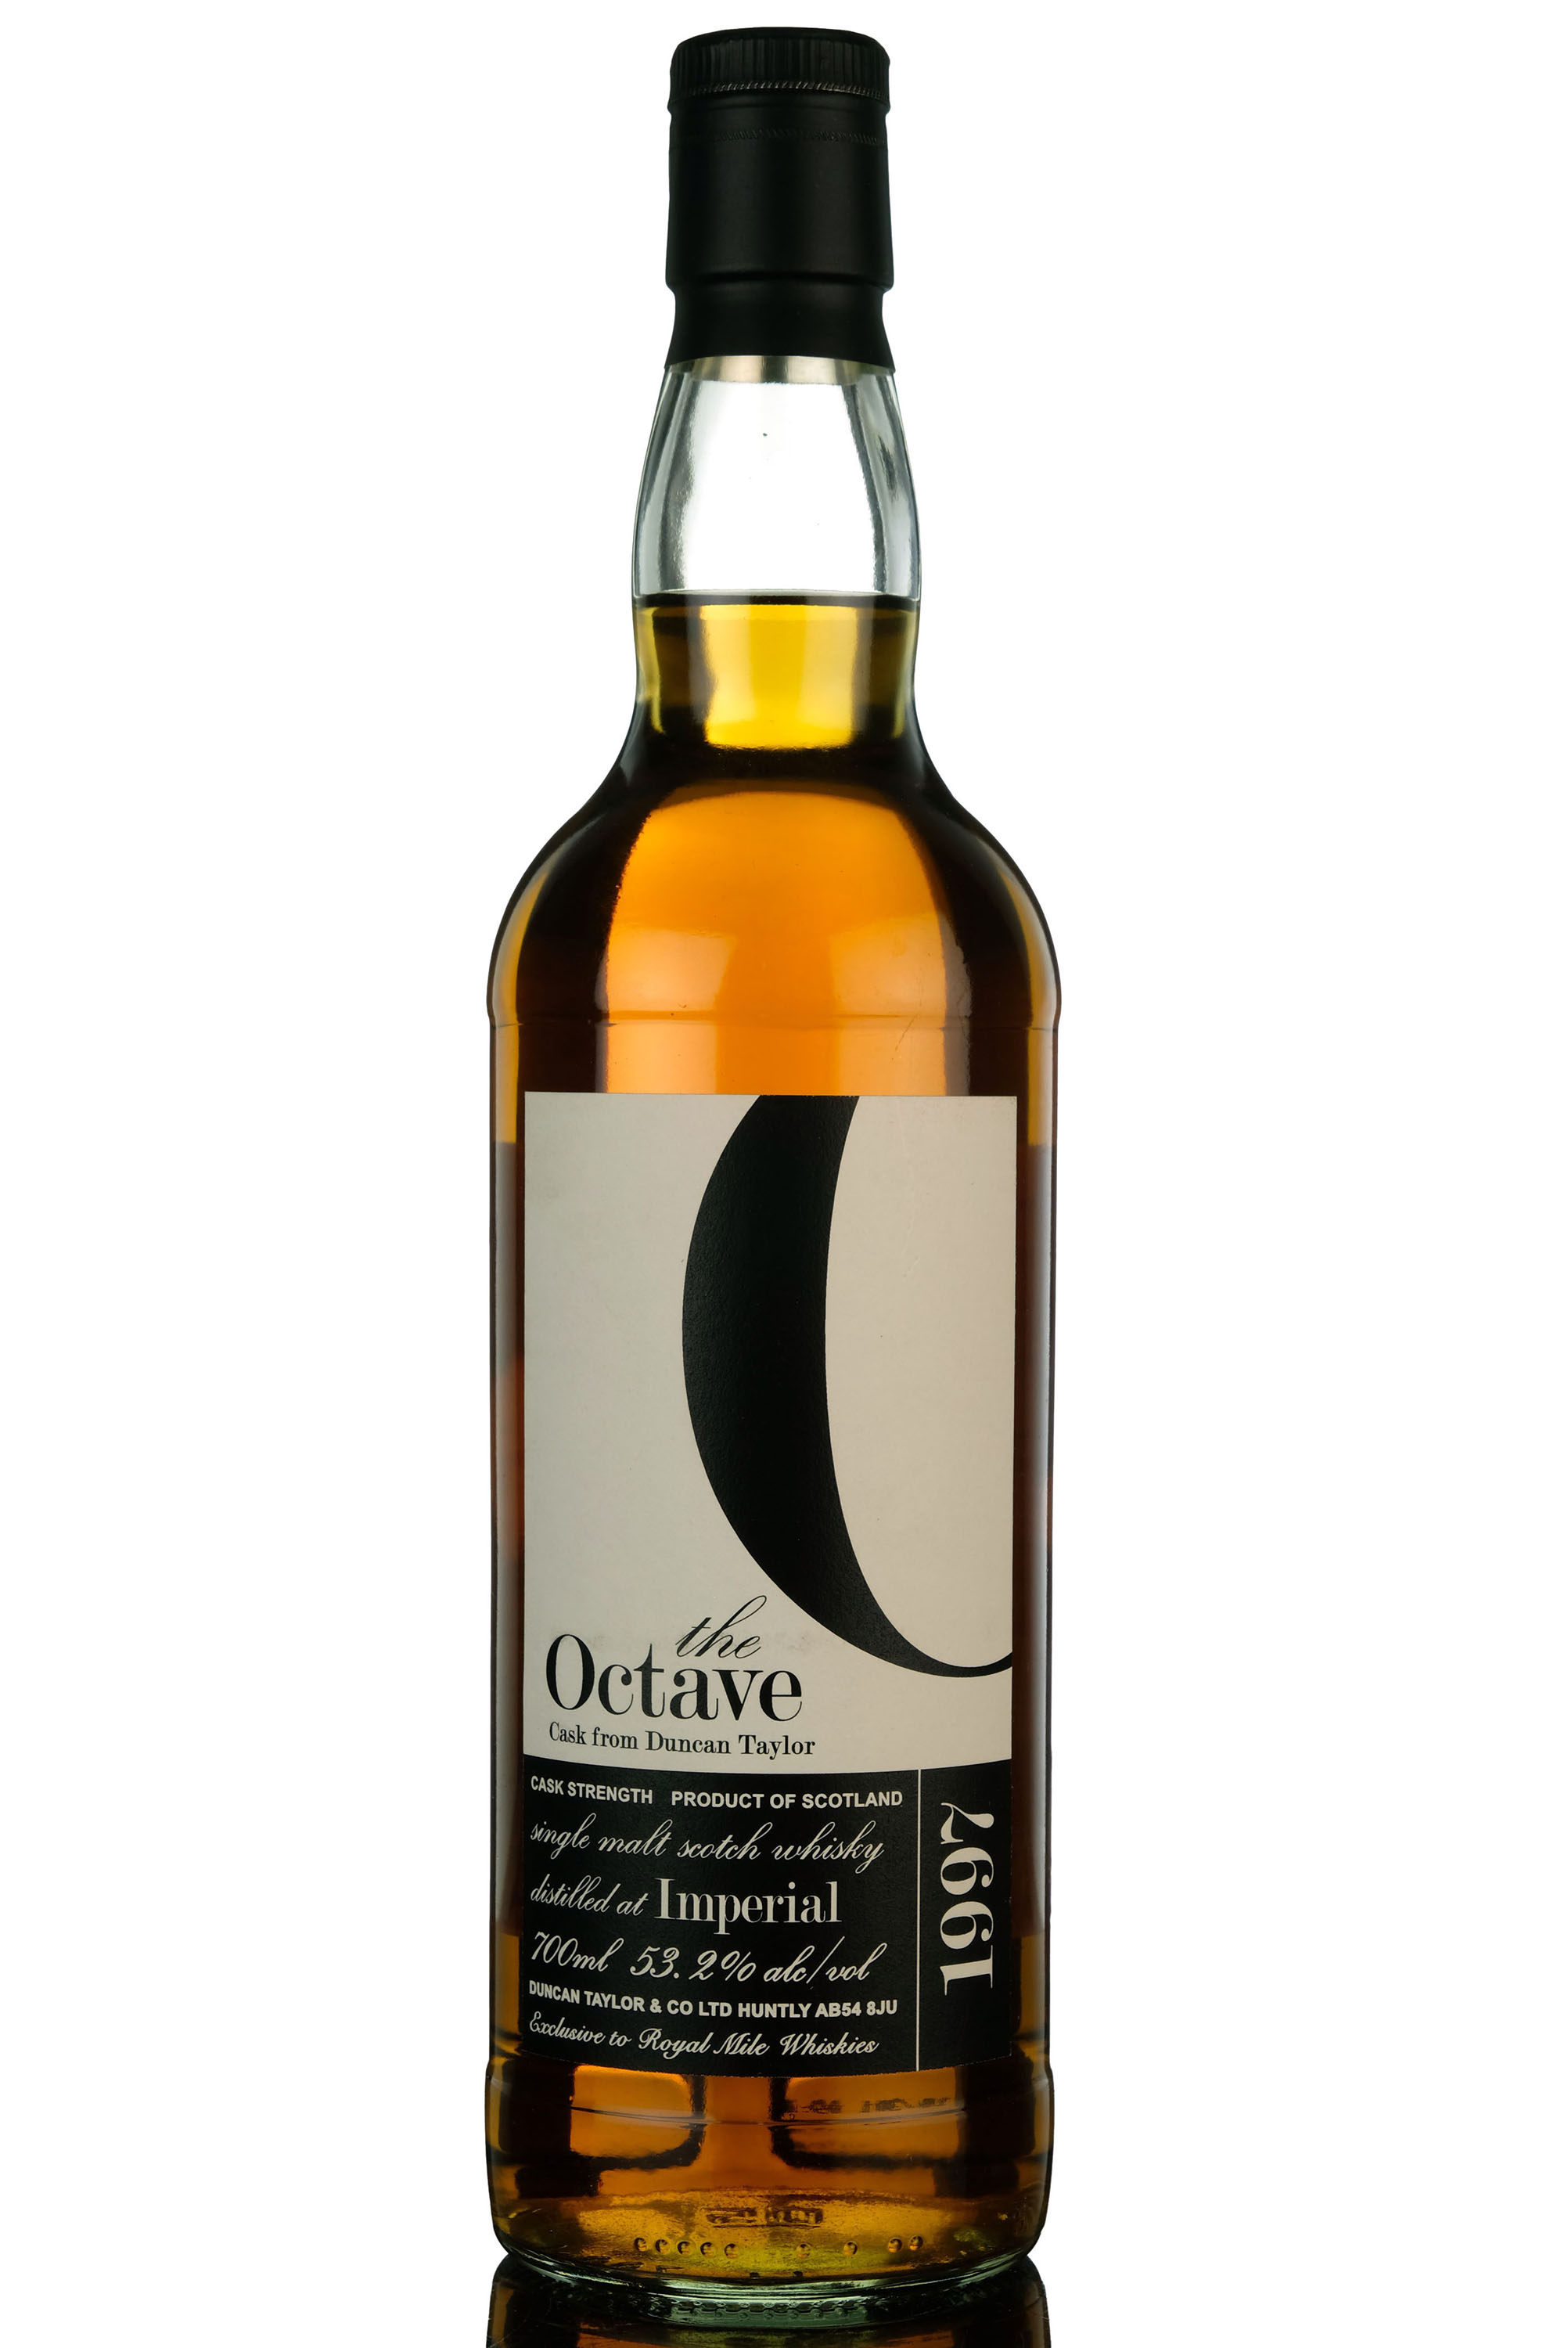 Imperial 1997-2010 - 13 Year Old - Duncan Taylor - Octave - Single Cask 510663 - Royal Mil